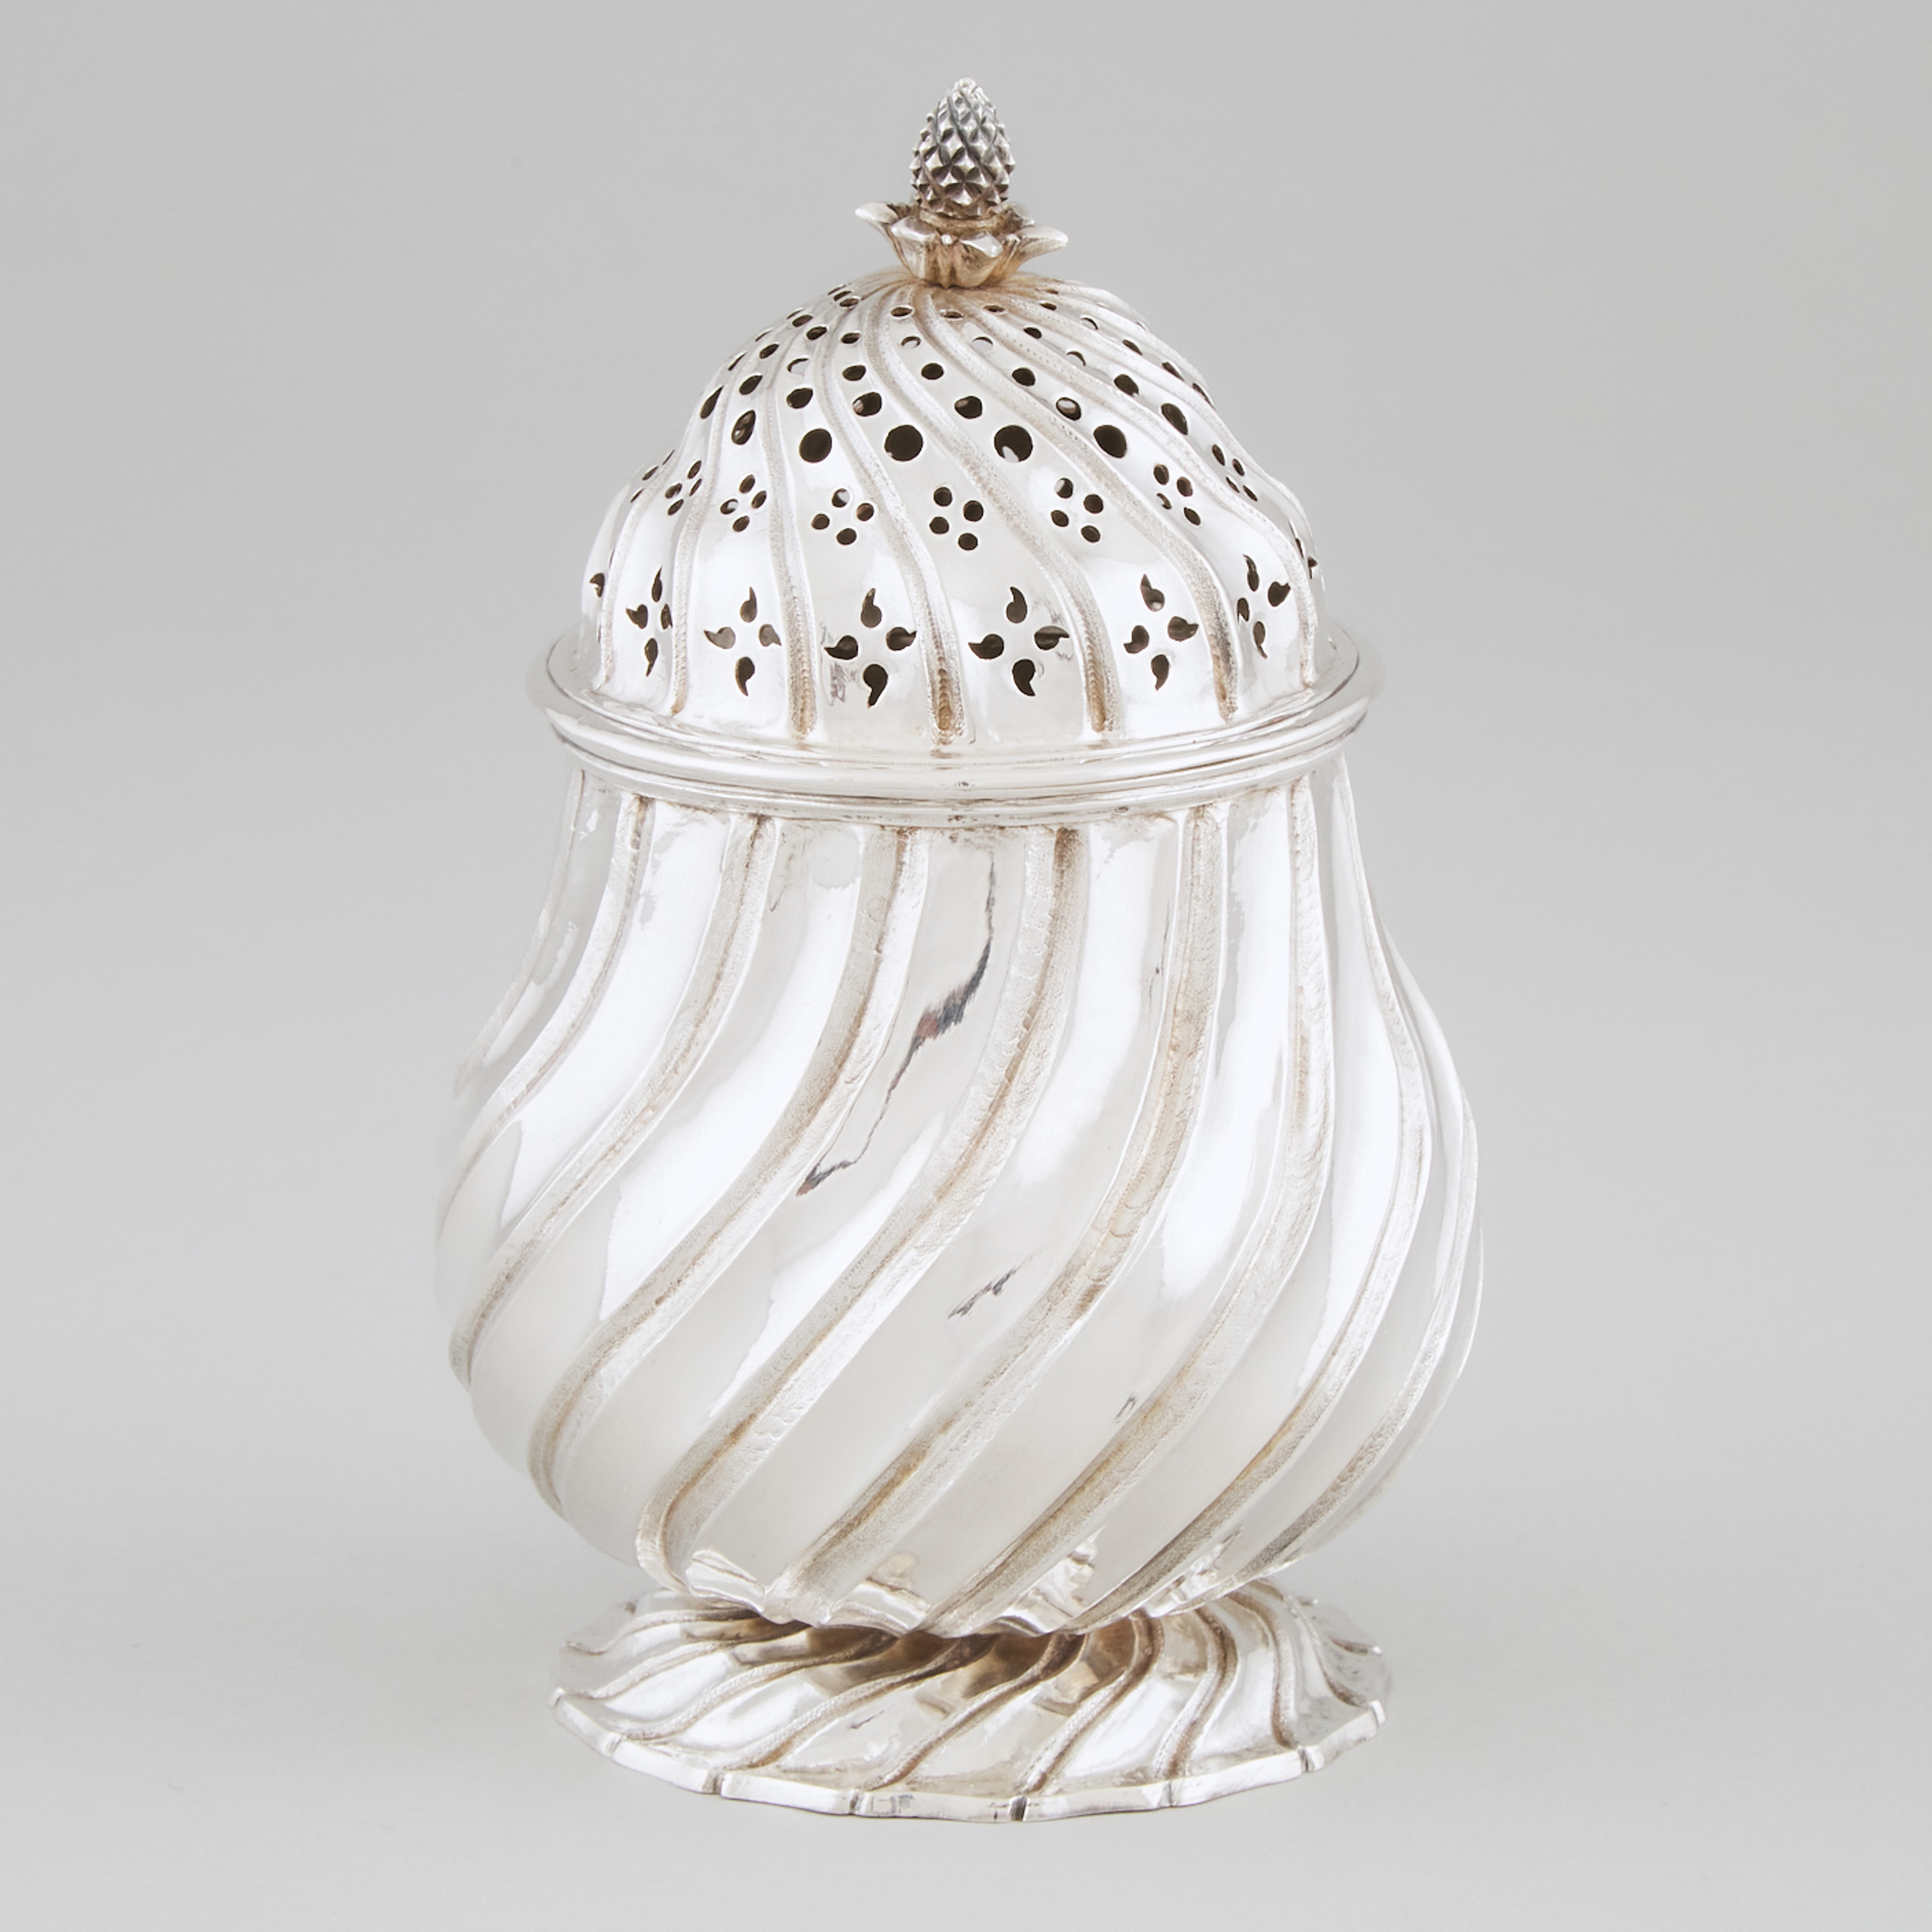 Maltese Silver Wrythen Fluted Sugar Caster, late 18th century